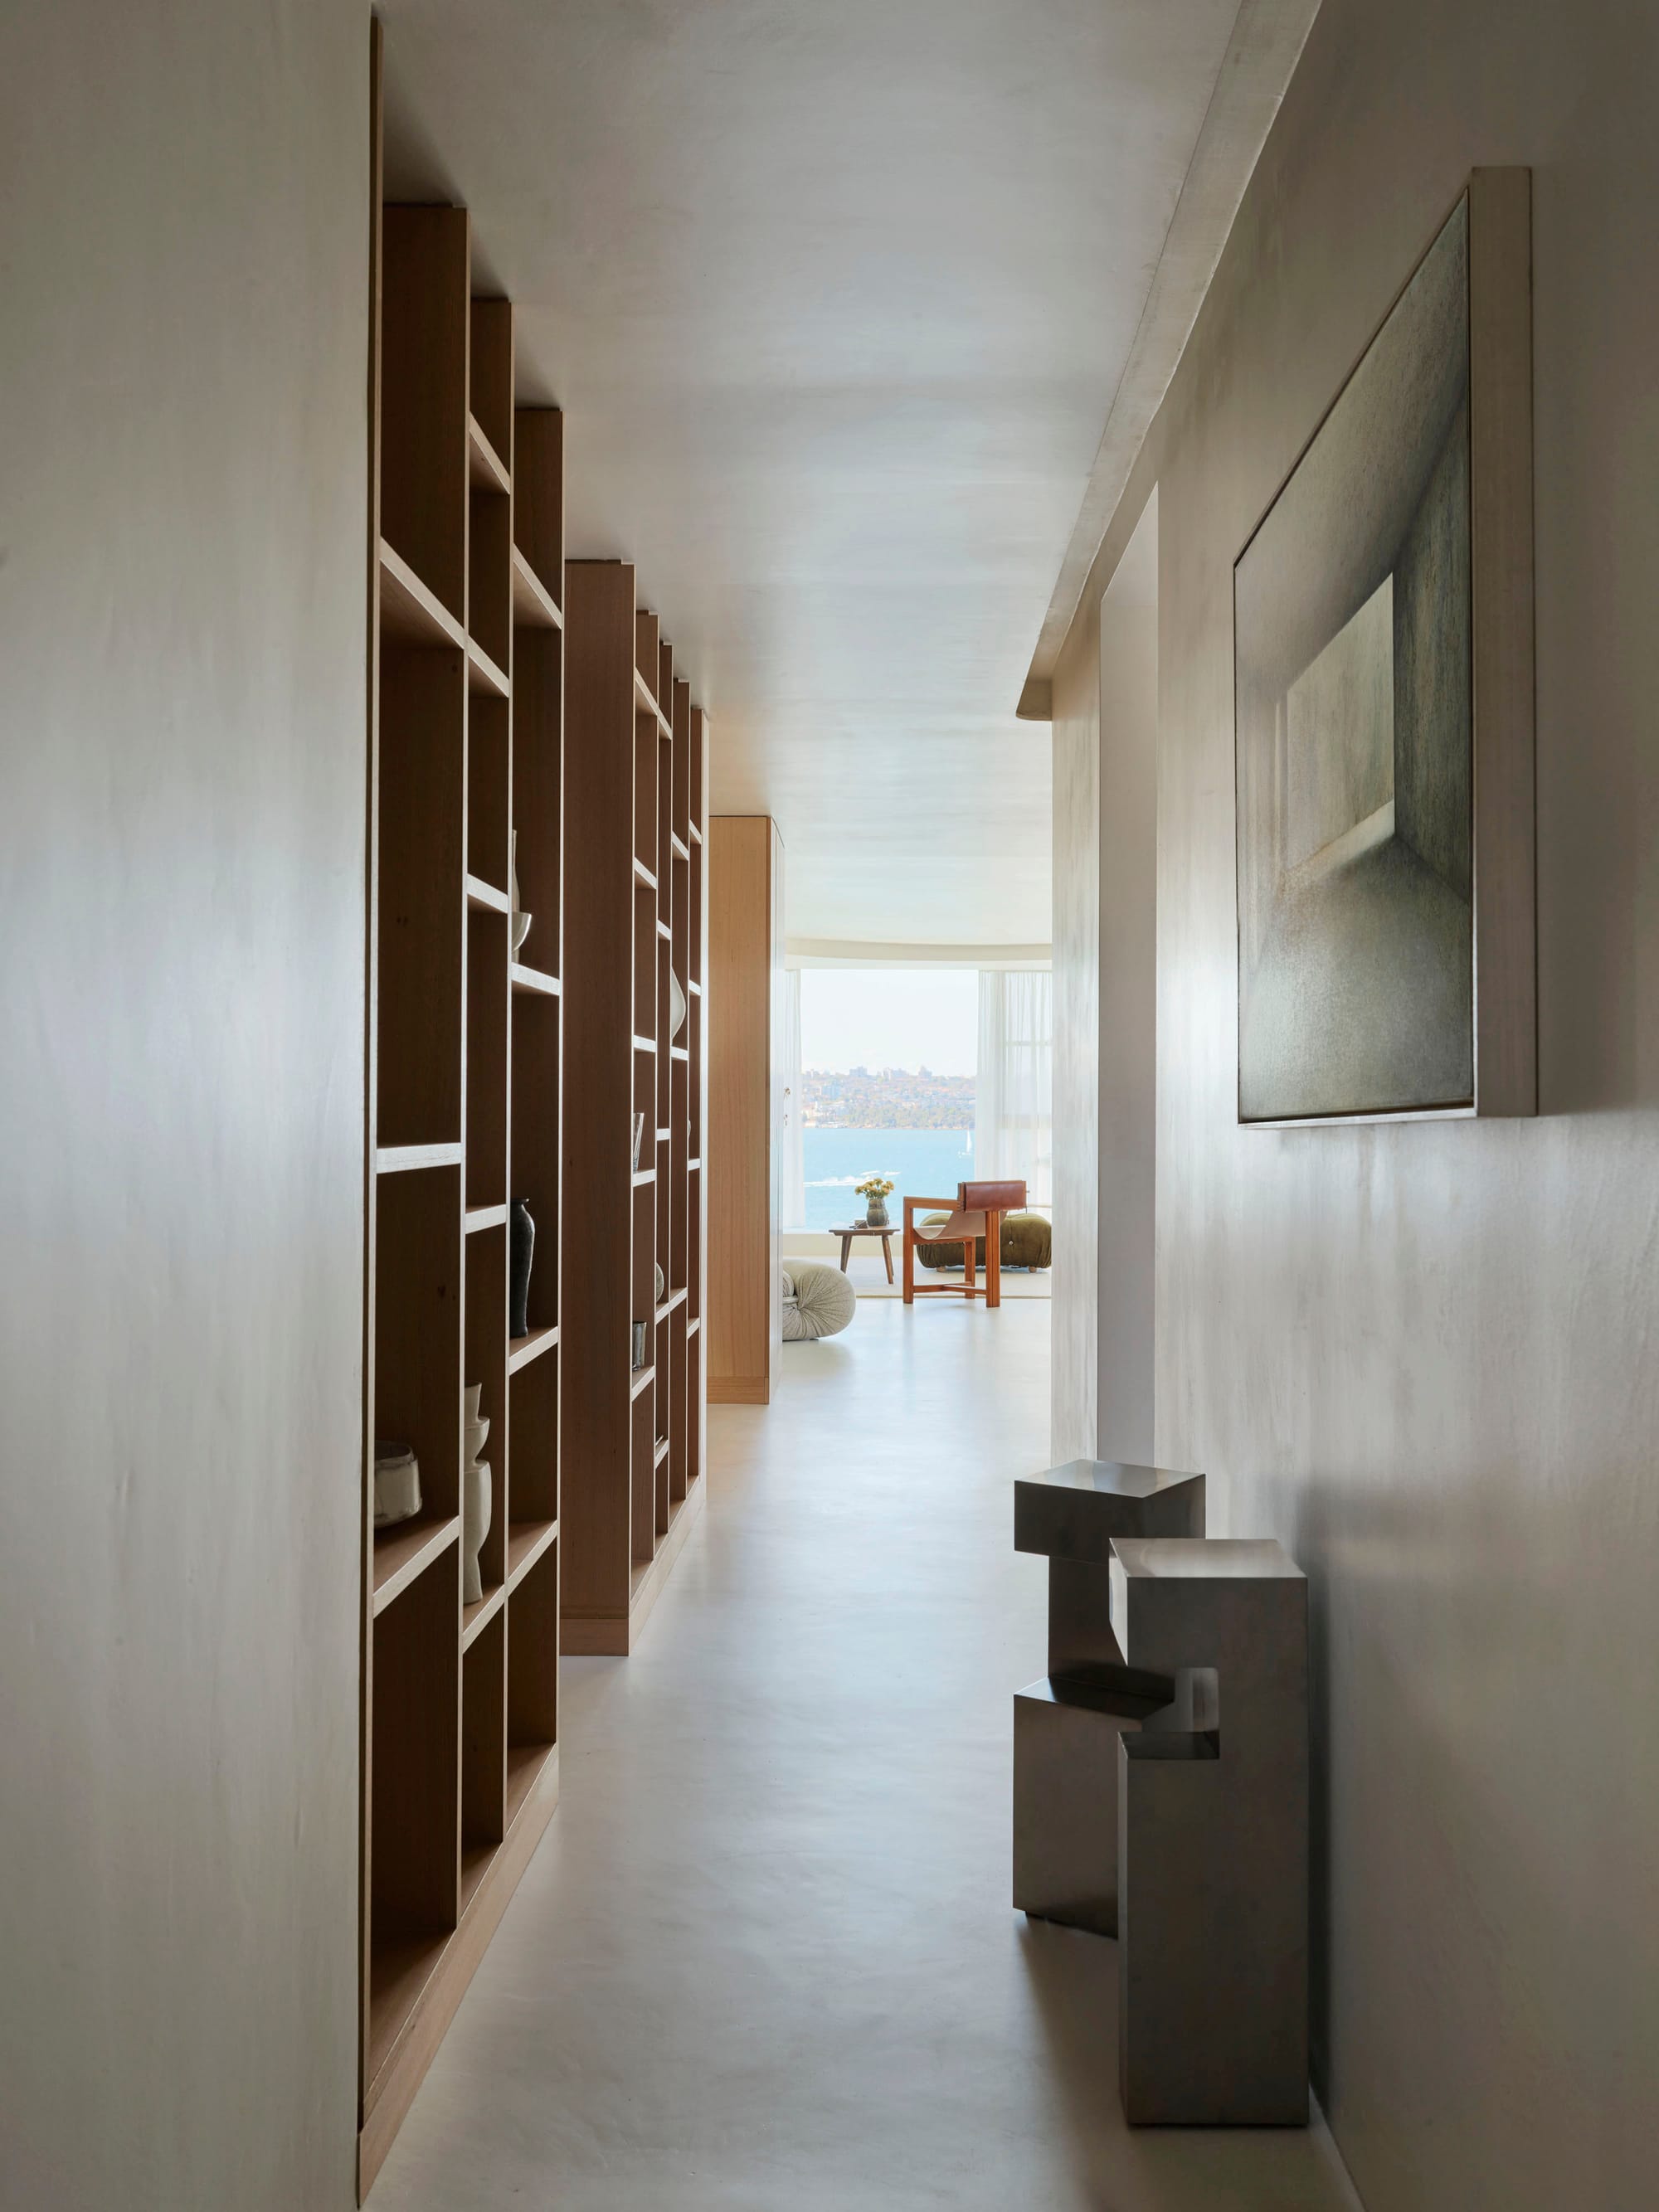 An interior shot of the hallway in this modern apartment with distant harbour views in the background